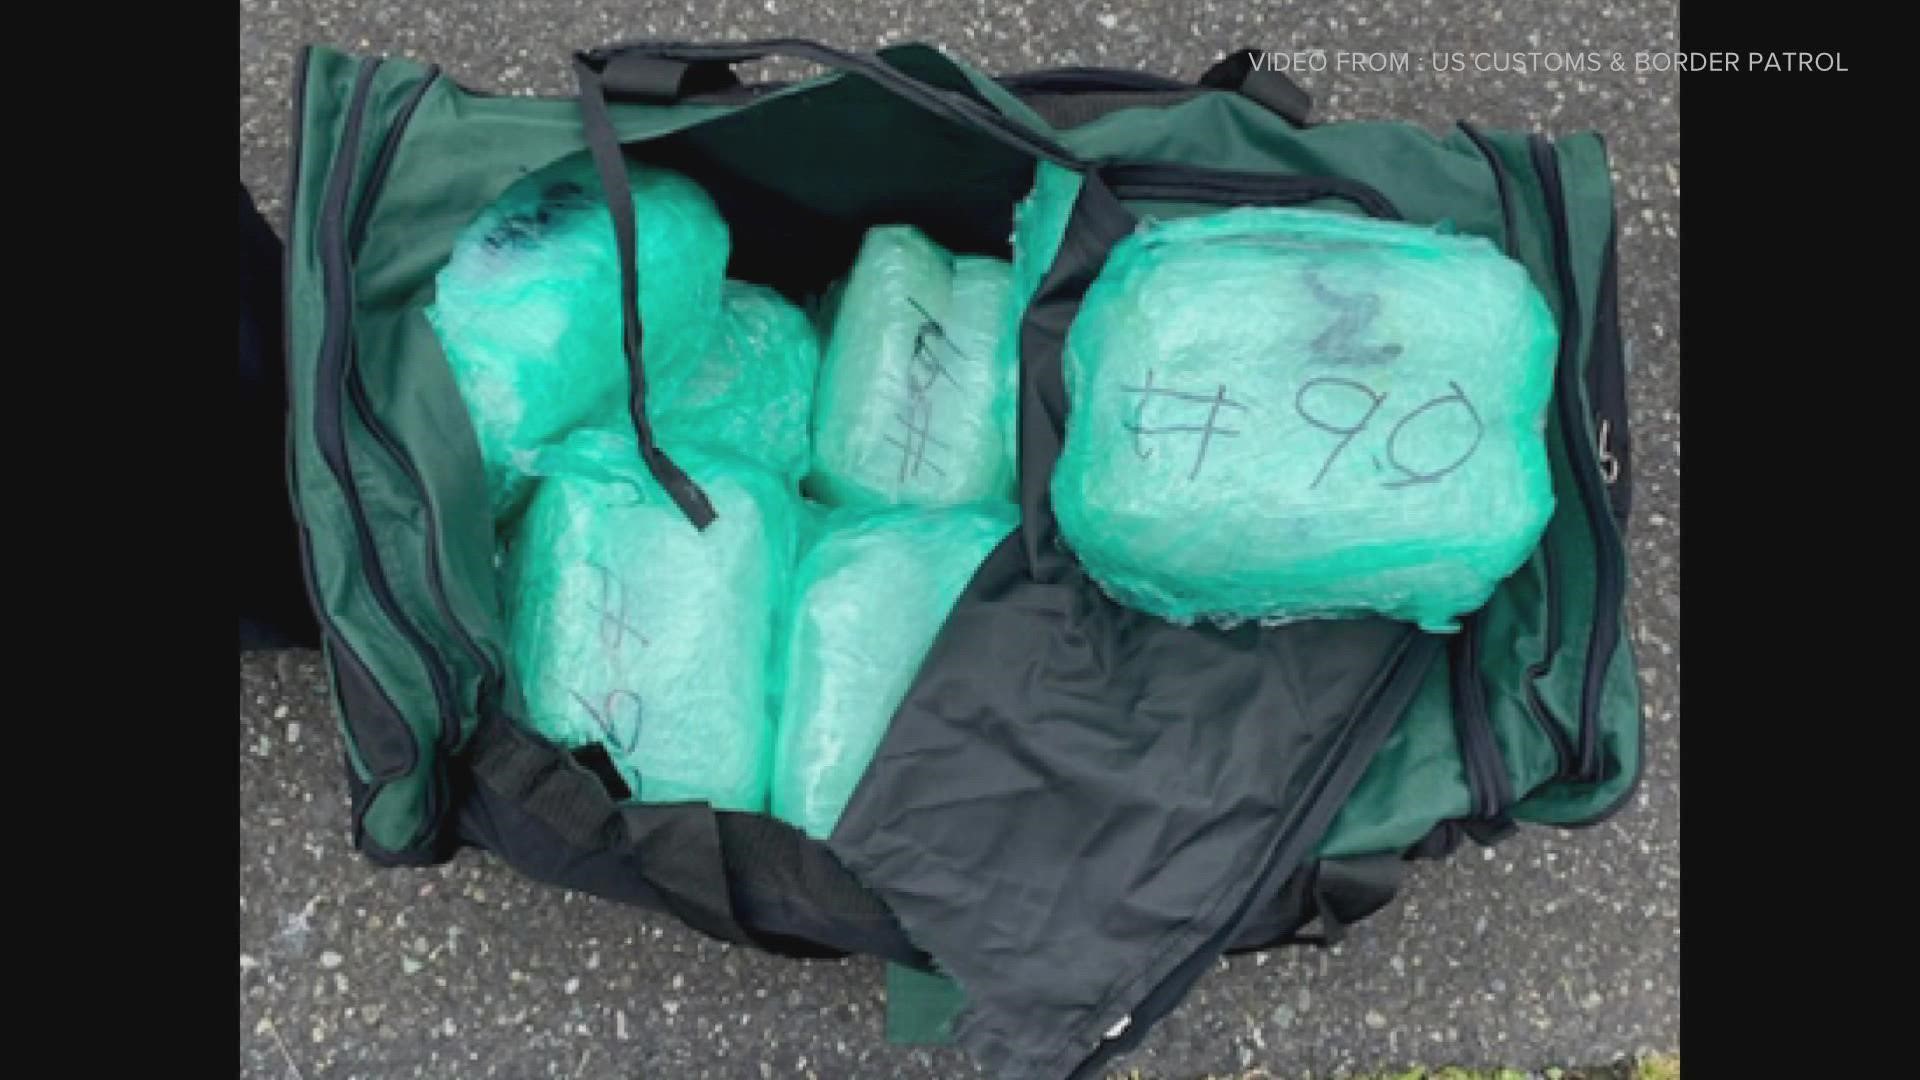 Authorities seized 1,432 pounds of meth from a speedboat as it was headed toward Canada. The suspect faces charges of possession with intent to distribute.